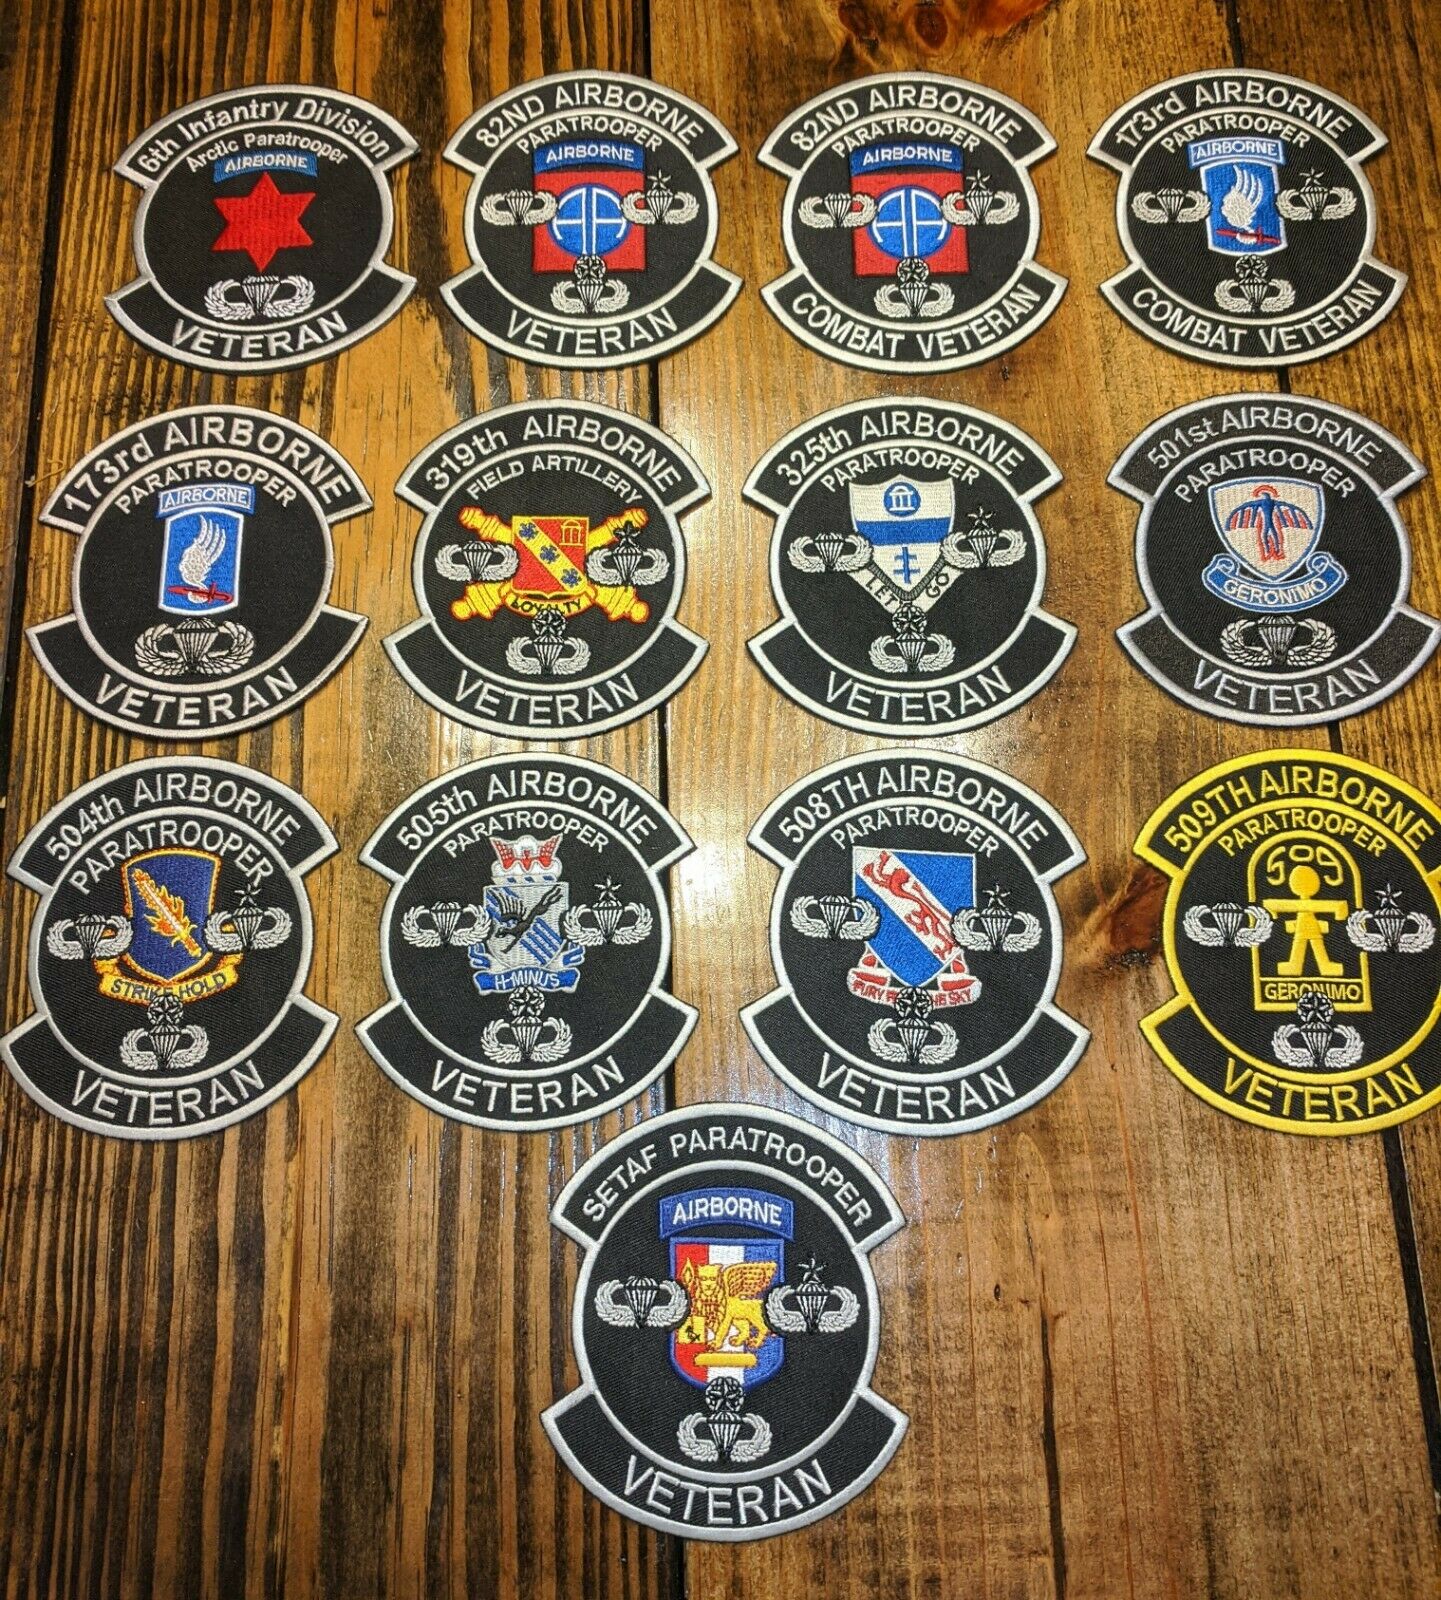 Veterans Unit Patch !! Very High Quality Patches